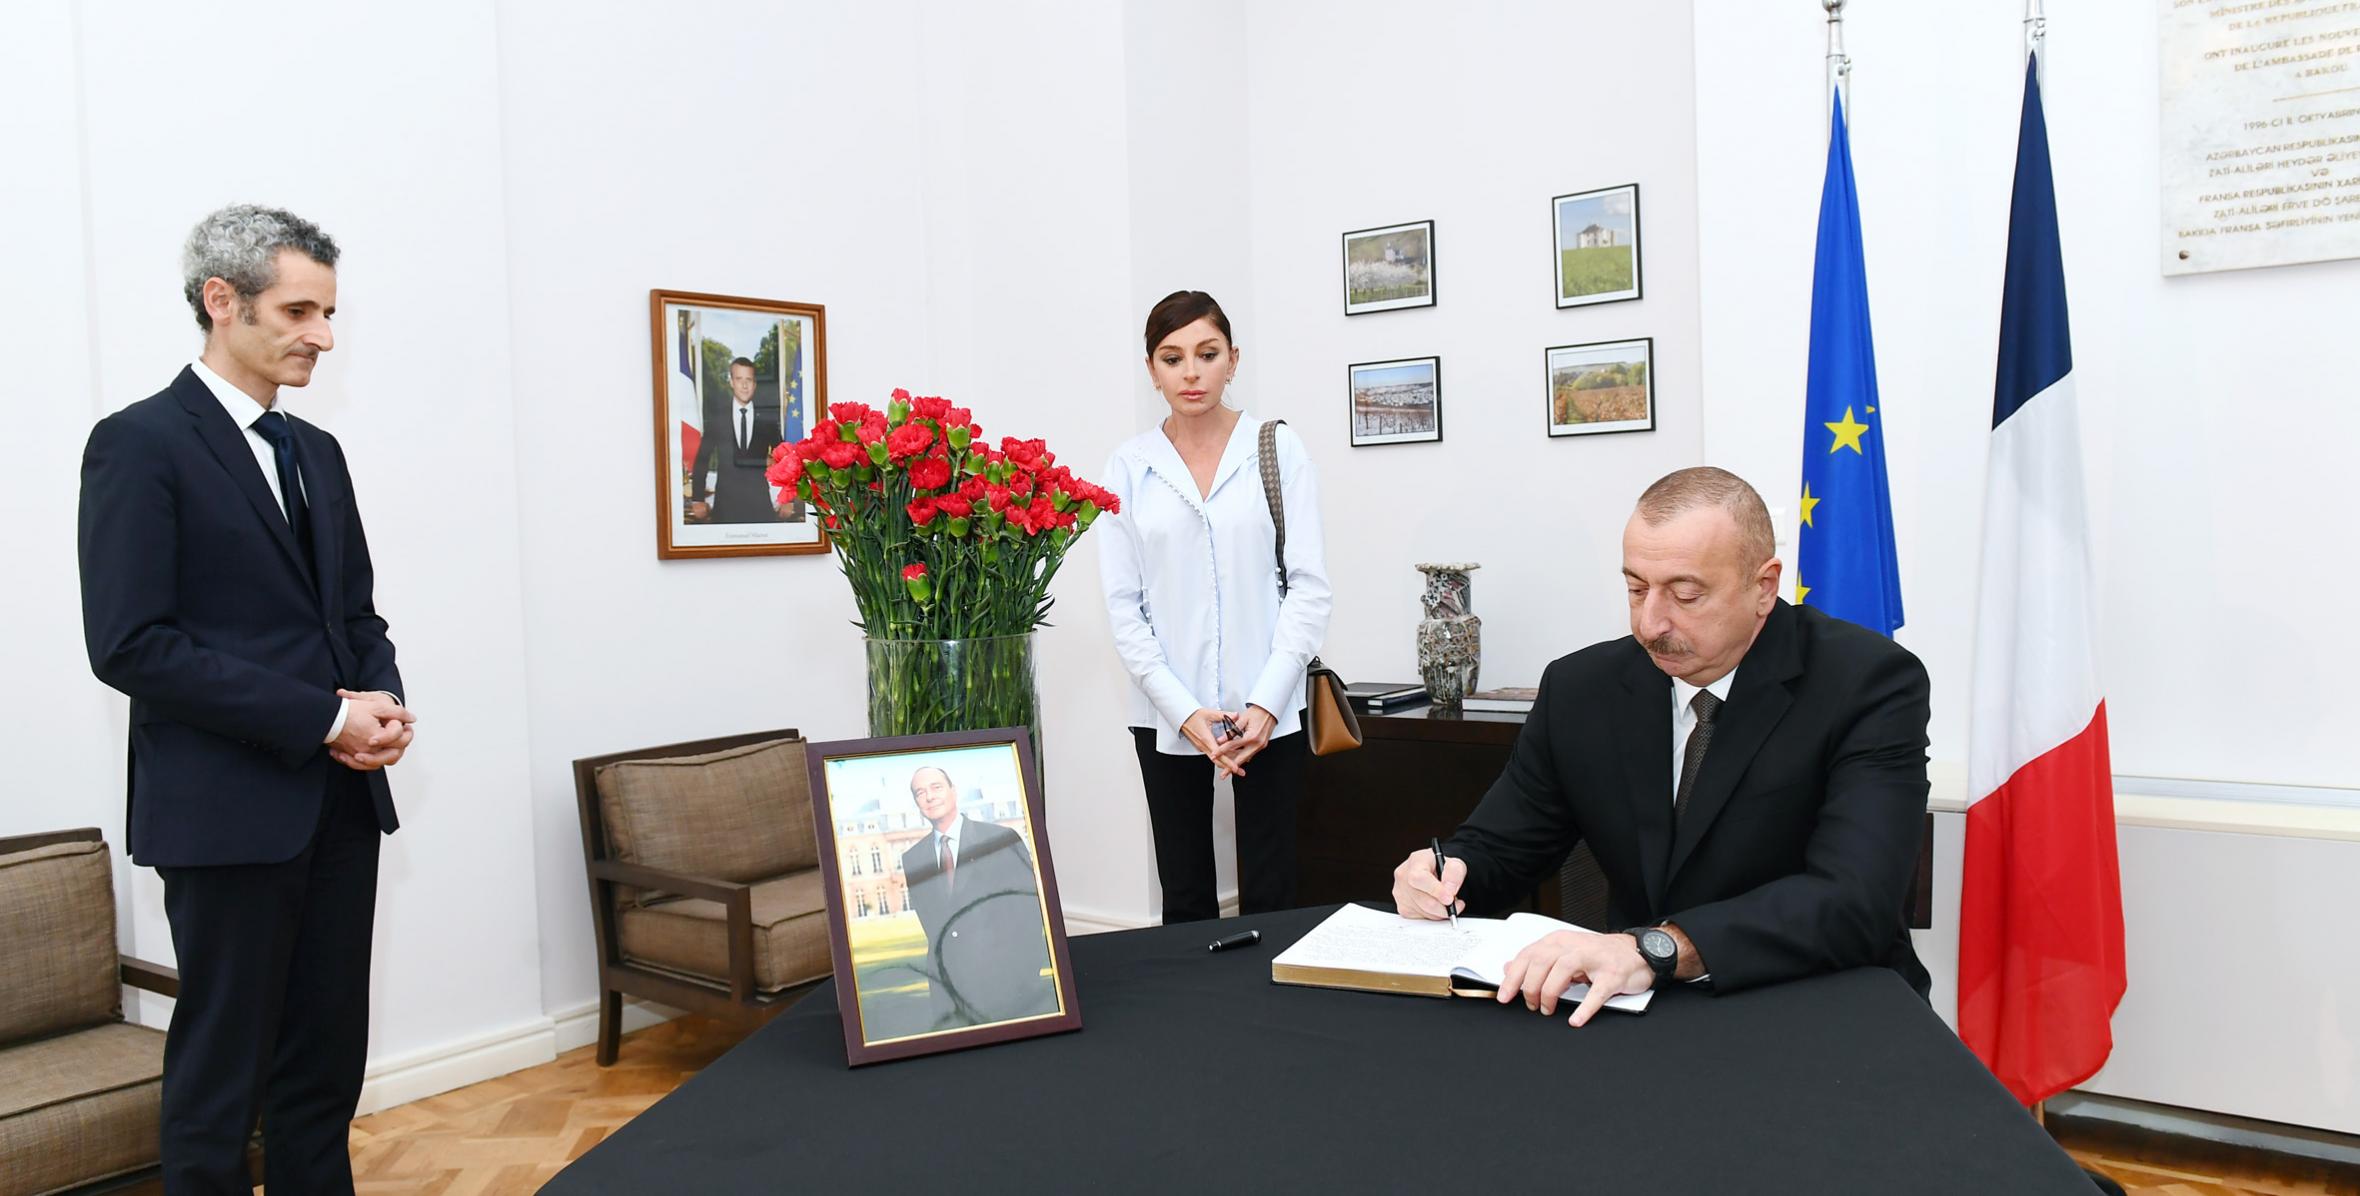 Ilham Aliyev visited French Embassy to offer condolences over death of former President Jacques Chirac